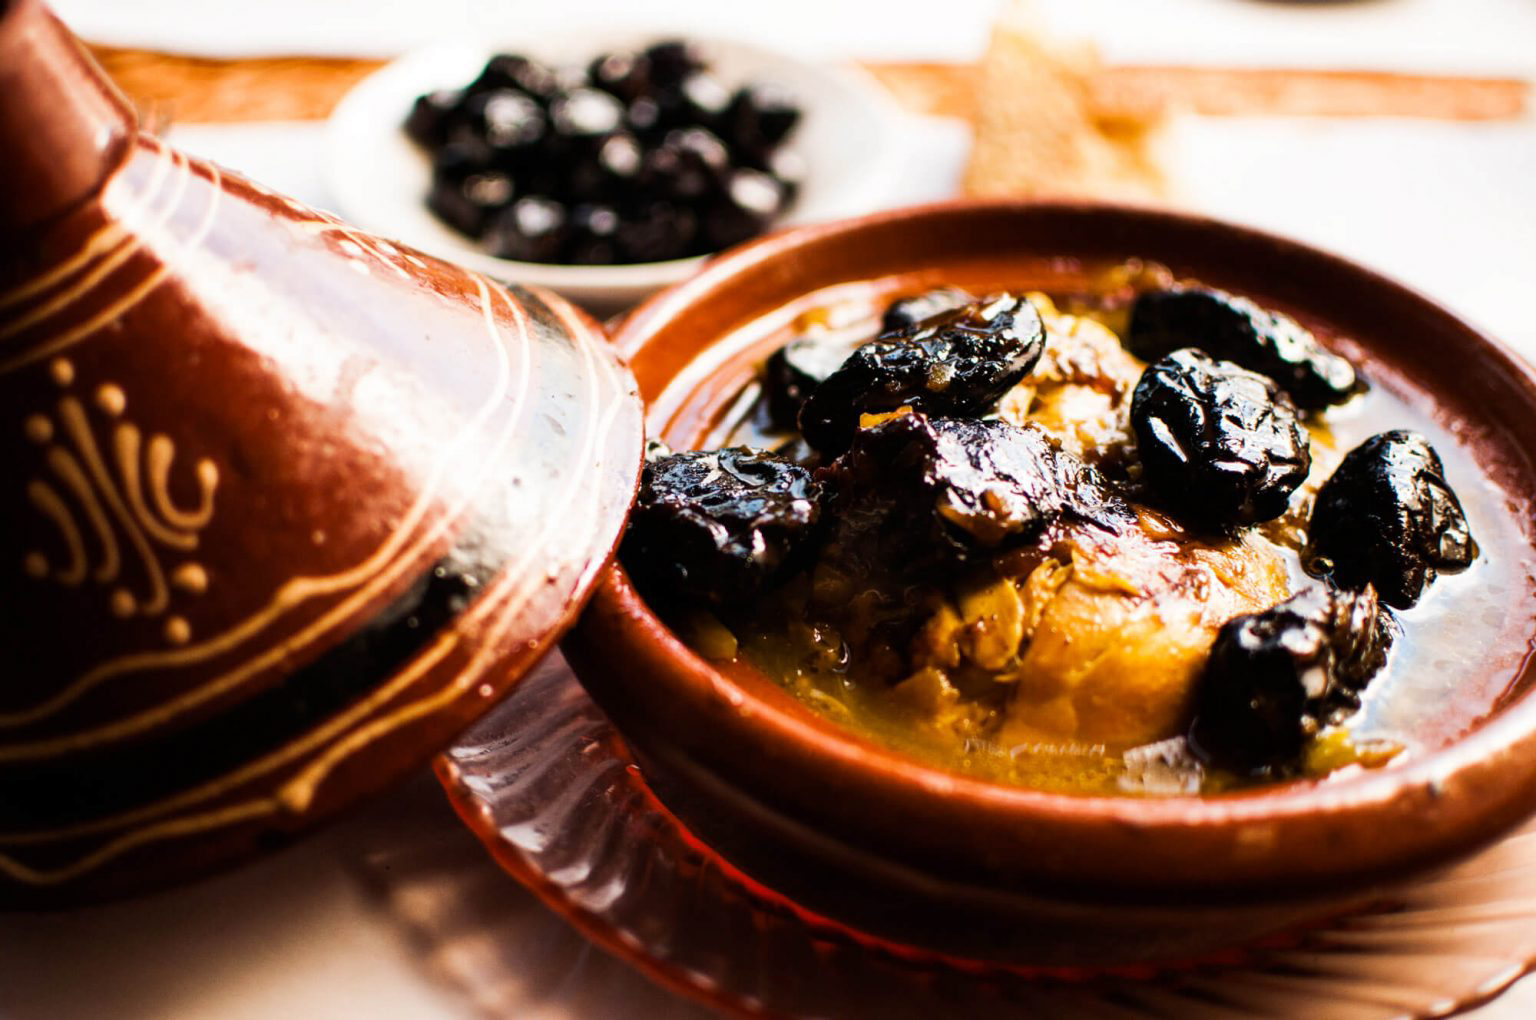 An open tagine filled with broth, cooked dates and other ingredients.